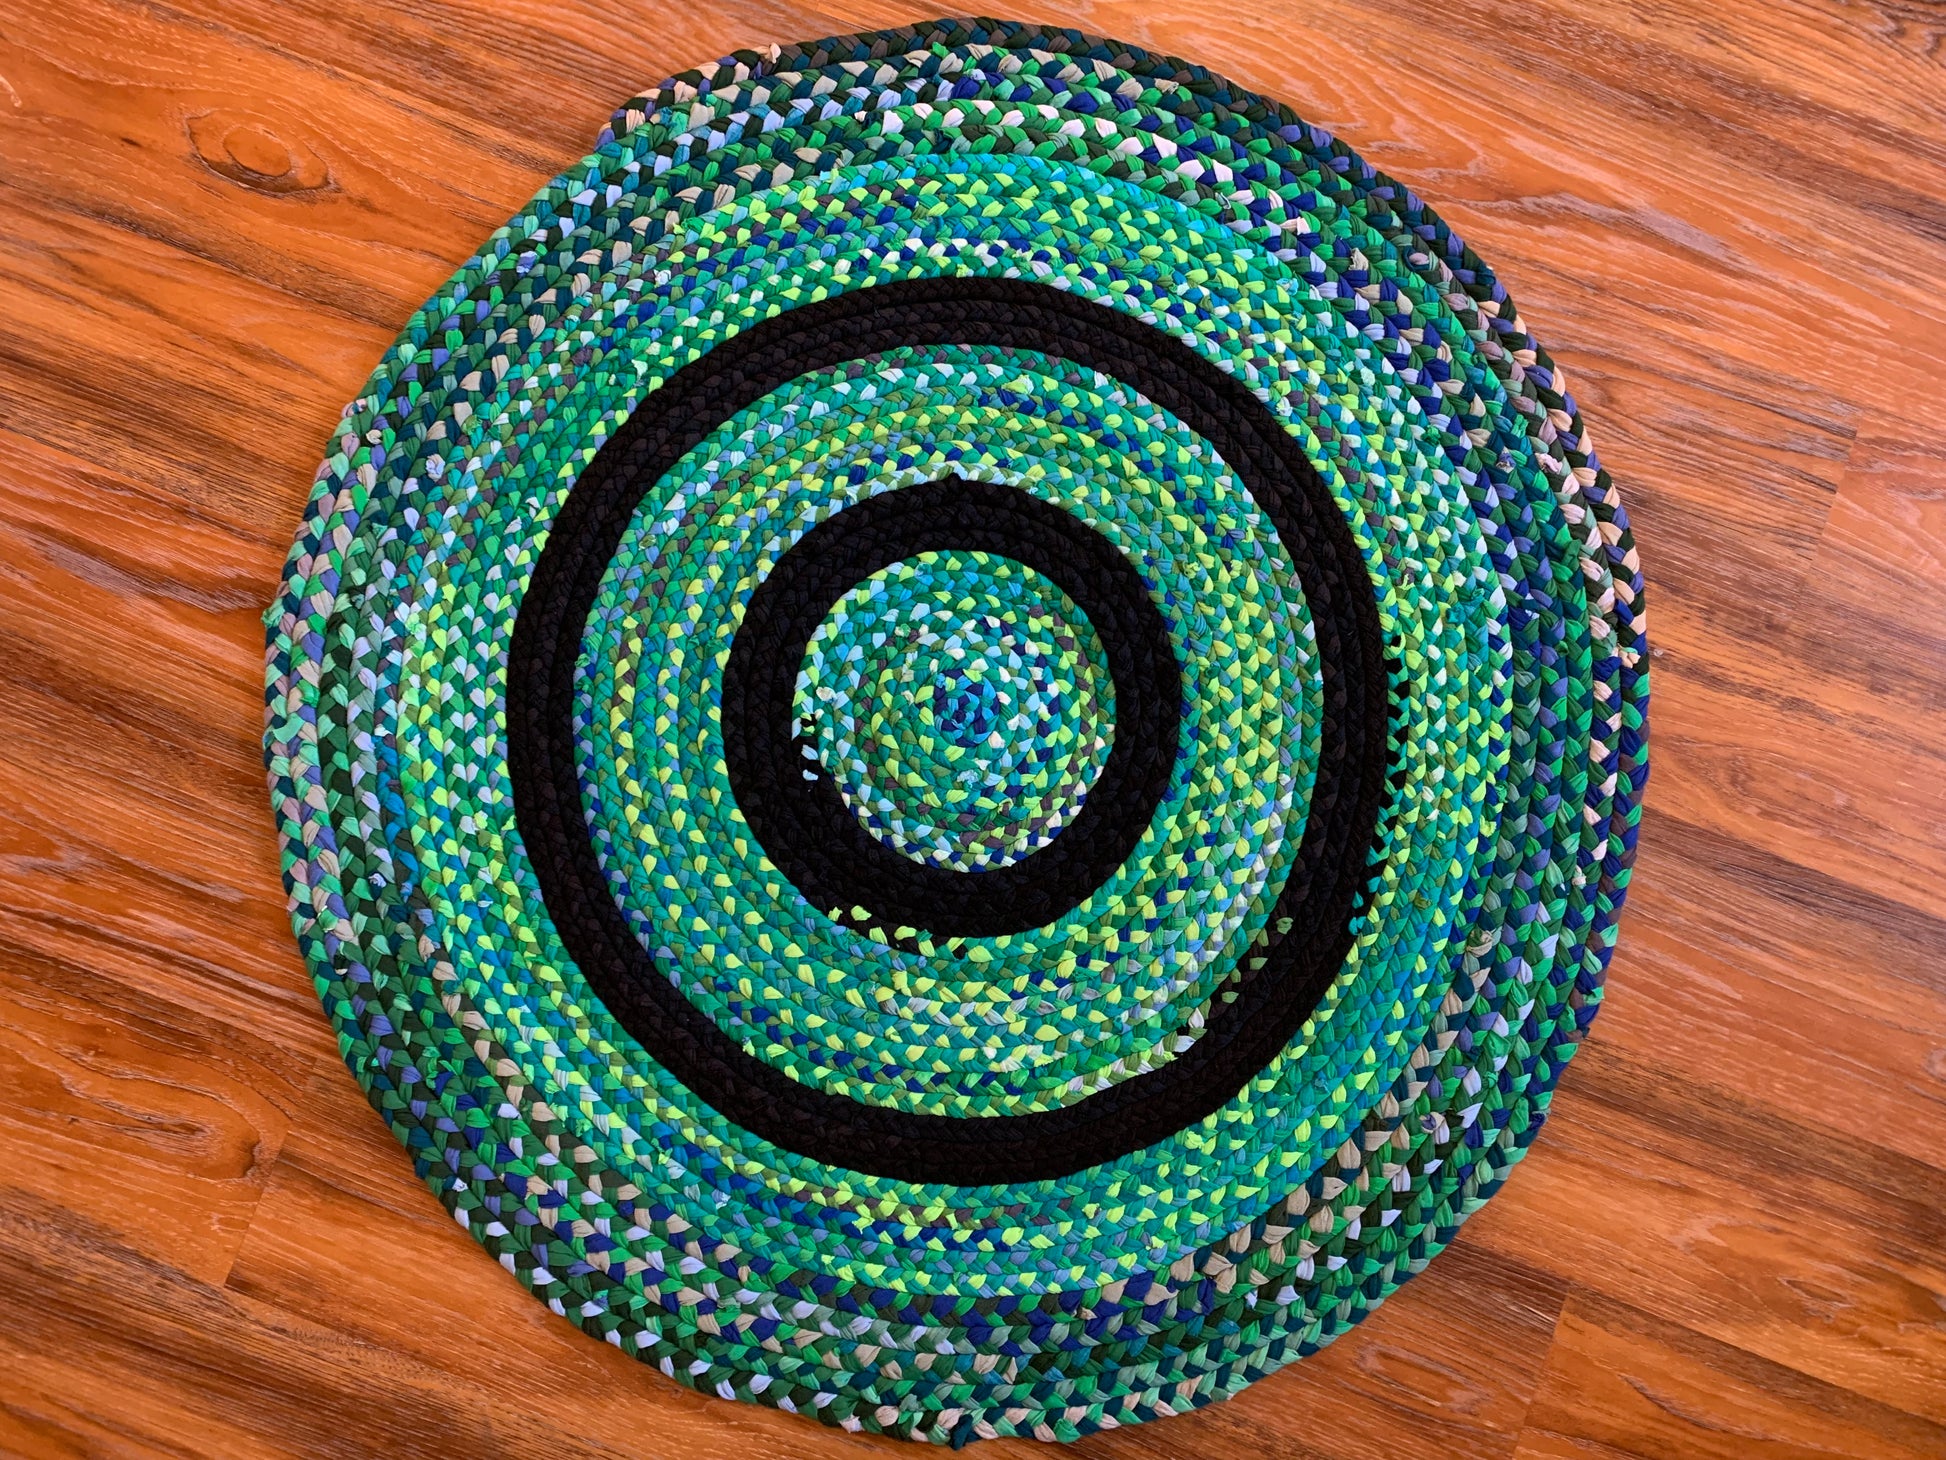 aerial view of green monet tshirt rug, with various greens sparkling throughout, and two black strips to form a bullseye